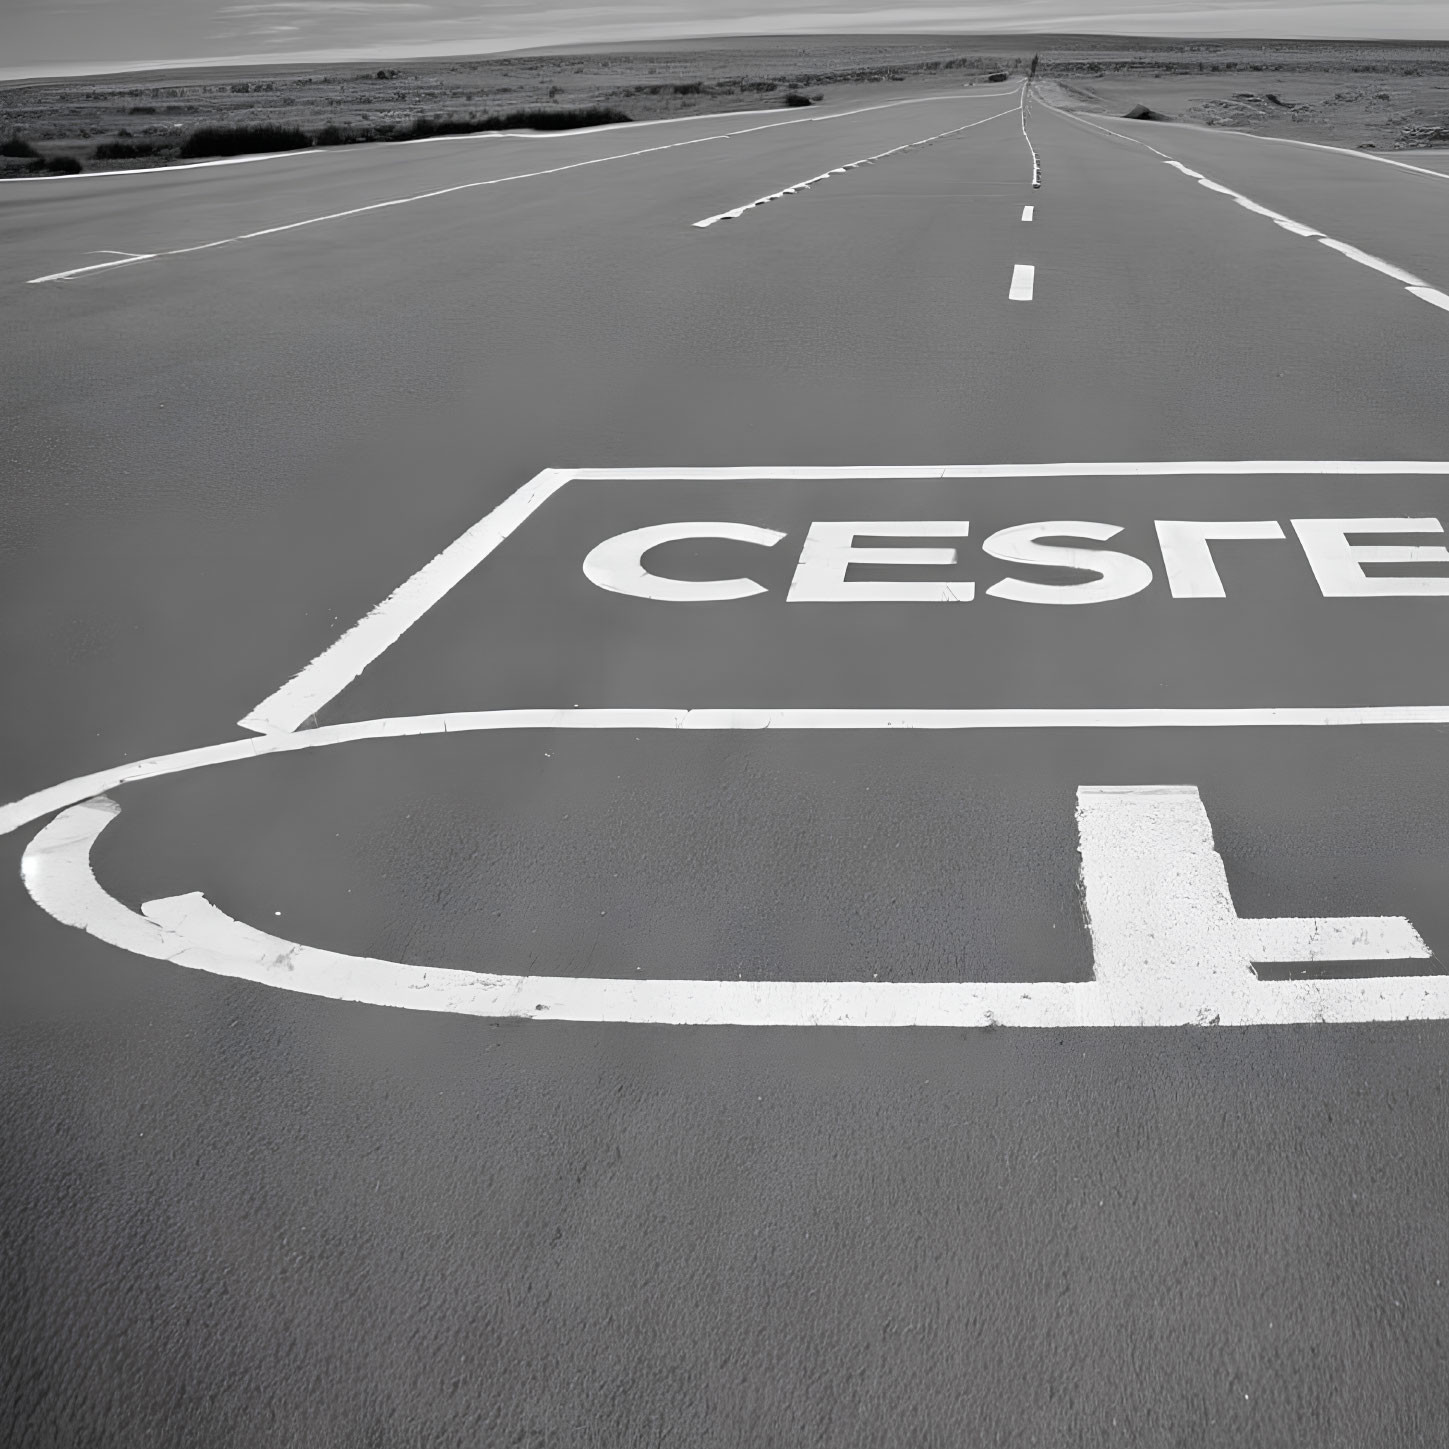 Monochrome photo of road markings with partial letters and arrow on empty tarmac